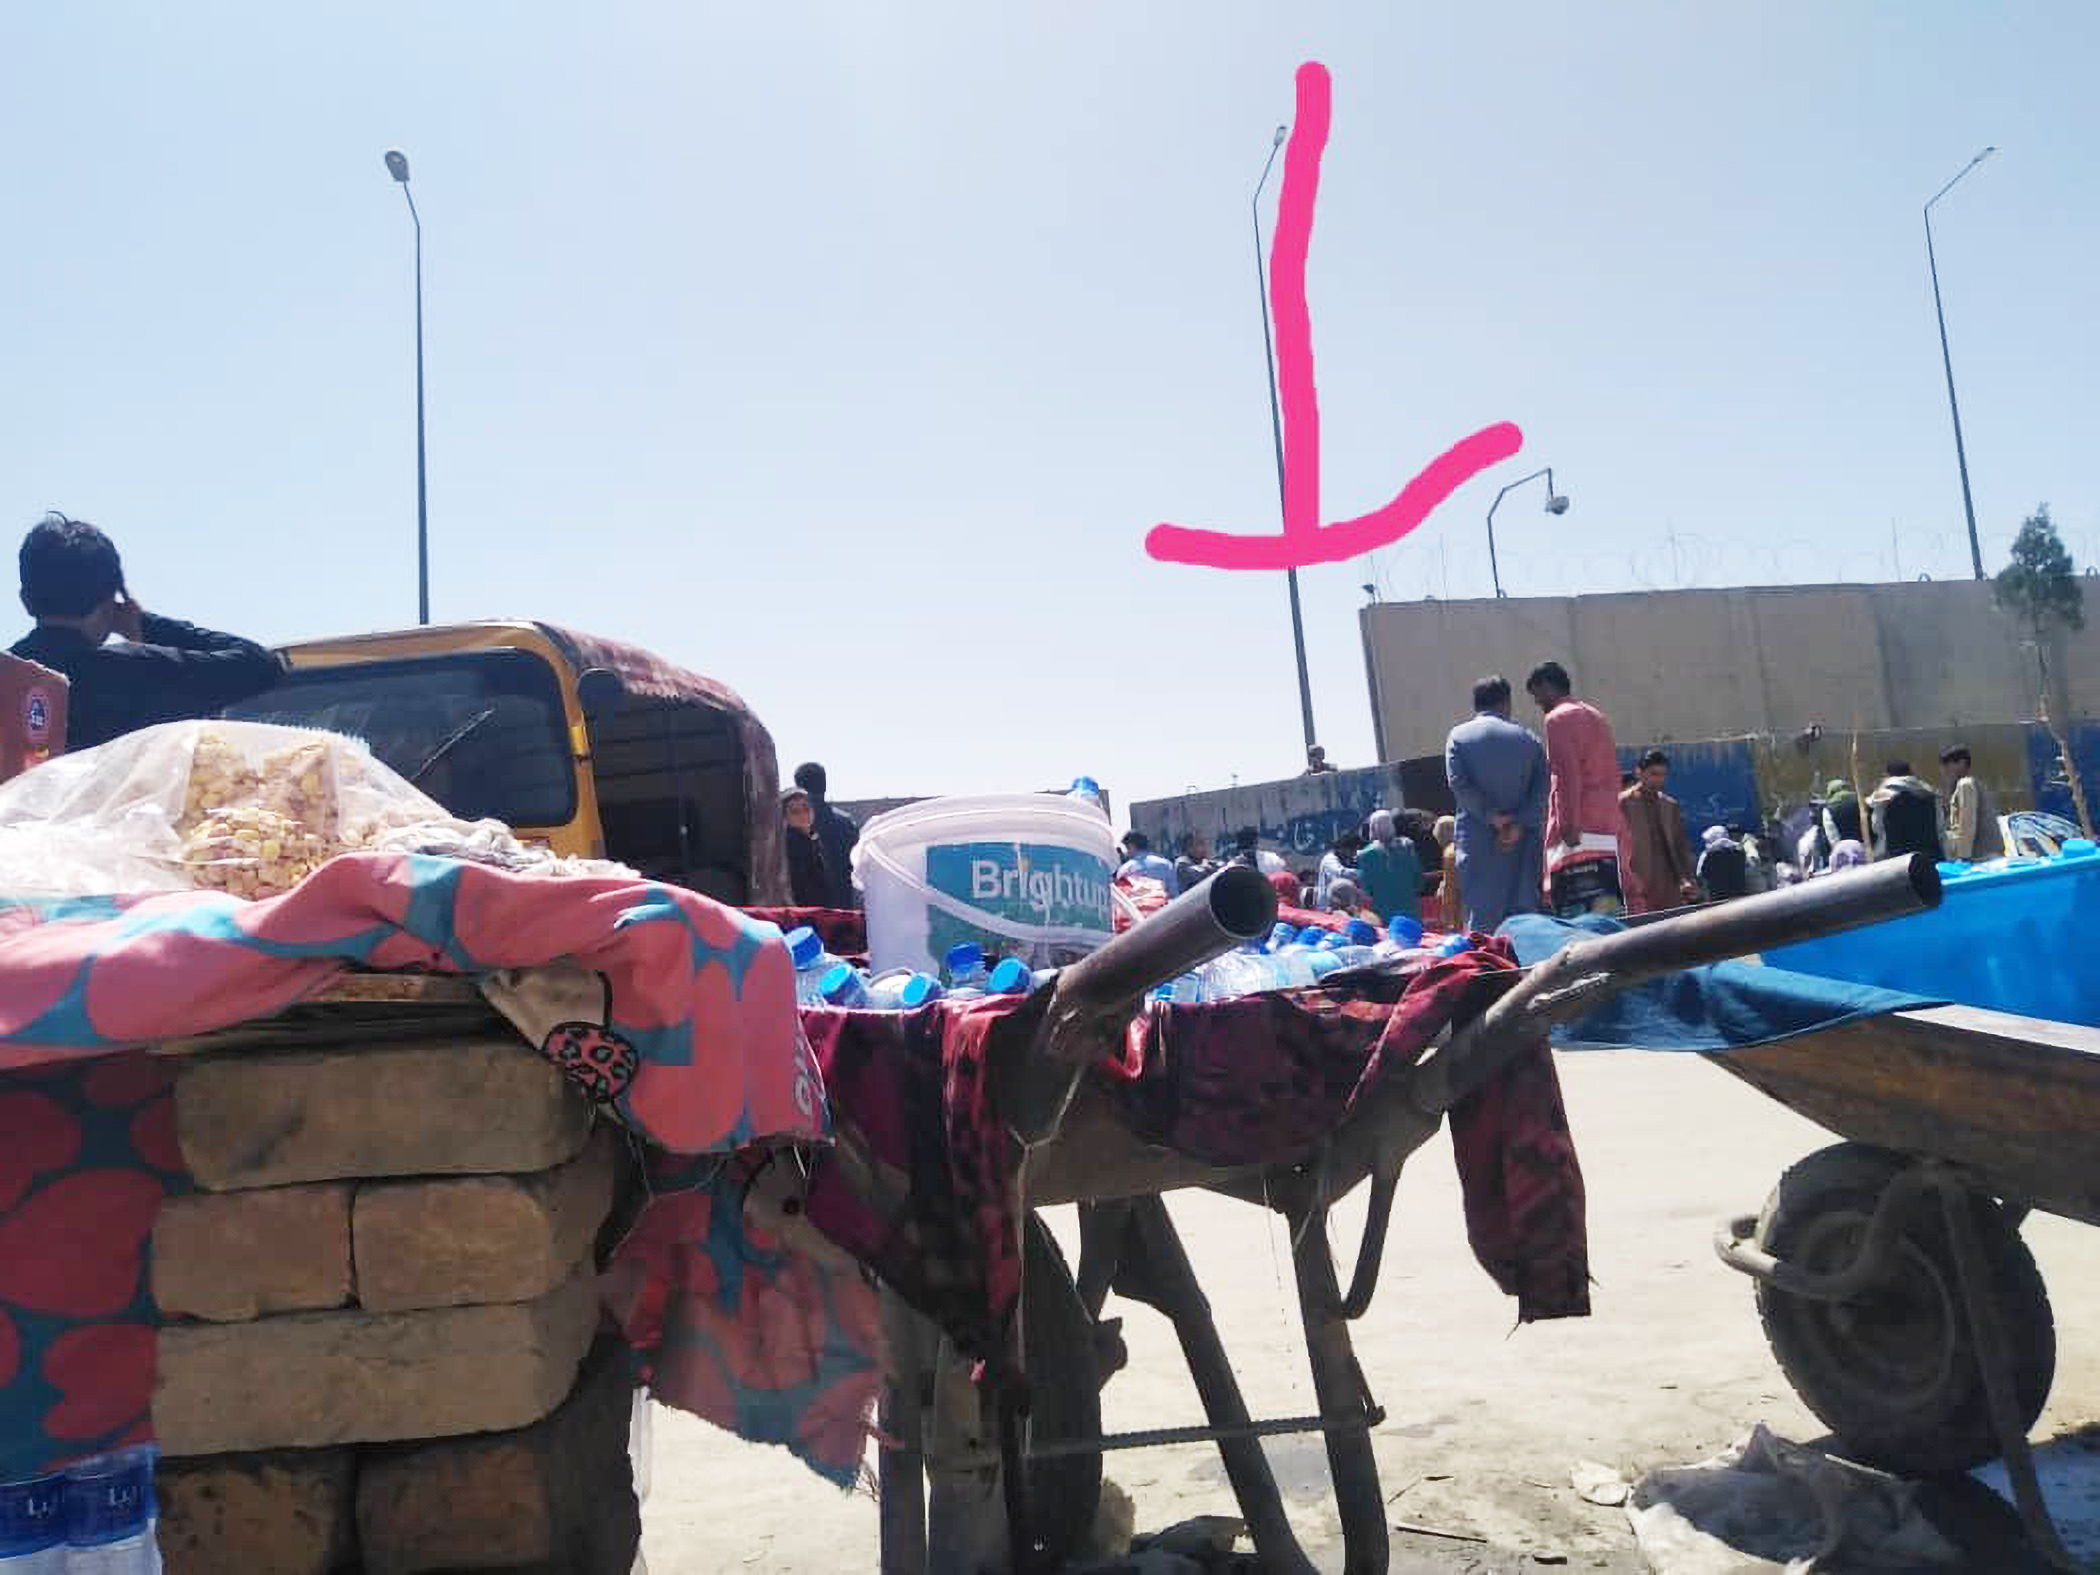 A photograph of the North Gate in Kabul, Afghanistan. Wheelbarrows and cement blocks are in the foreground, and a barrier is in the background, with a crowd behind the barrier. An arrow above the barrier points down to the center-right of the crowd.